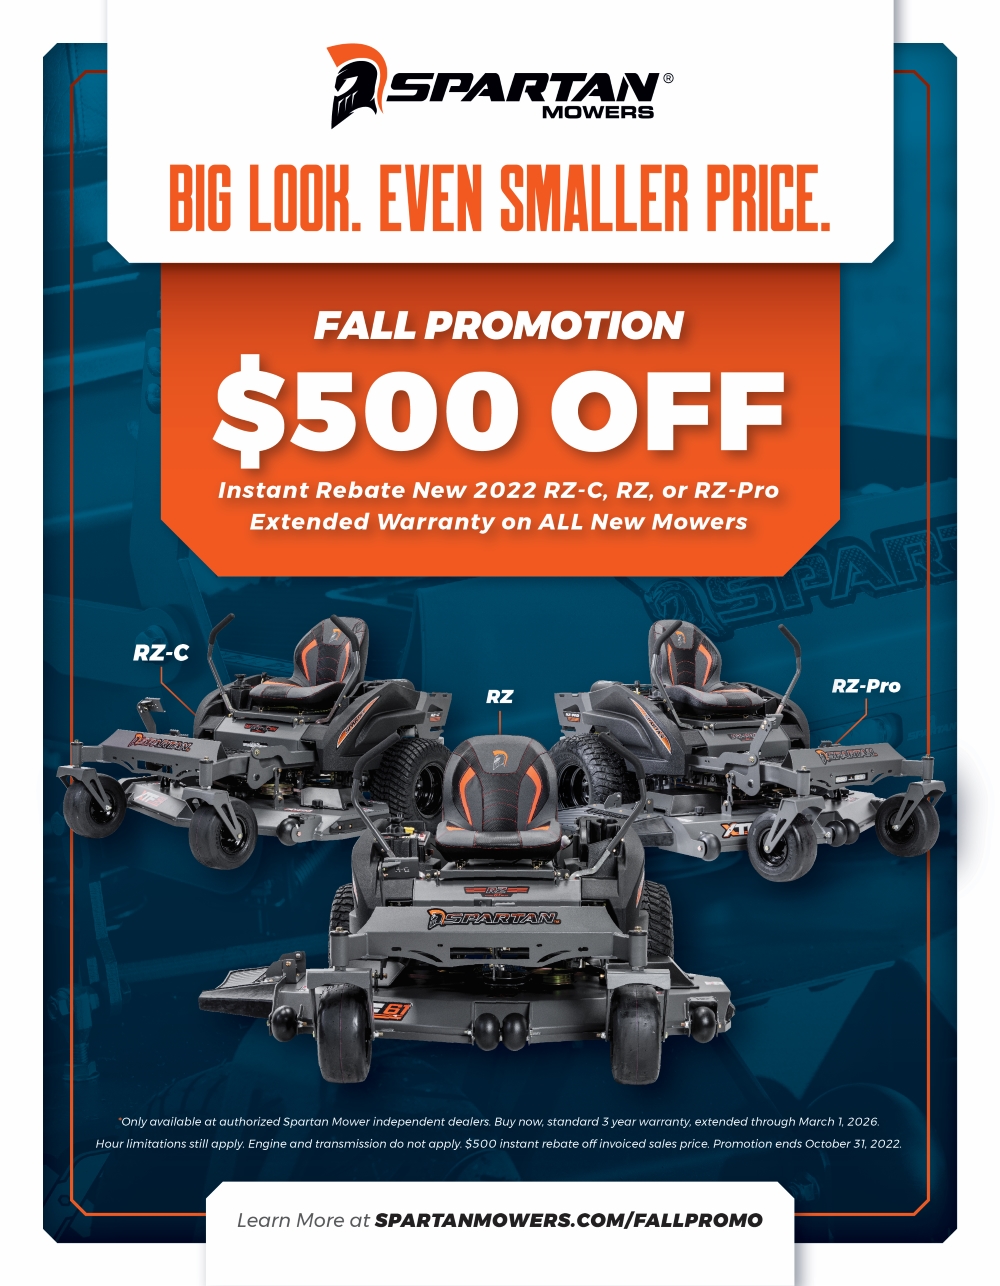 Fall Promotion